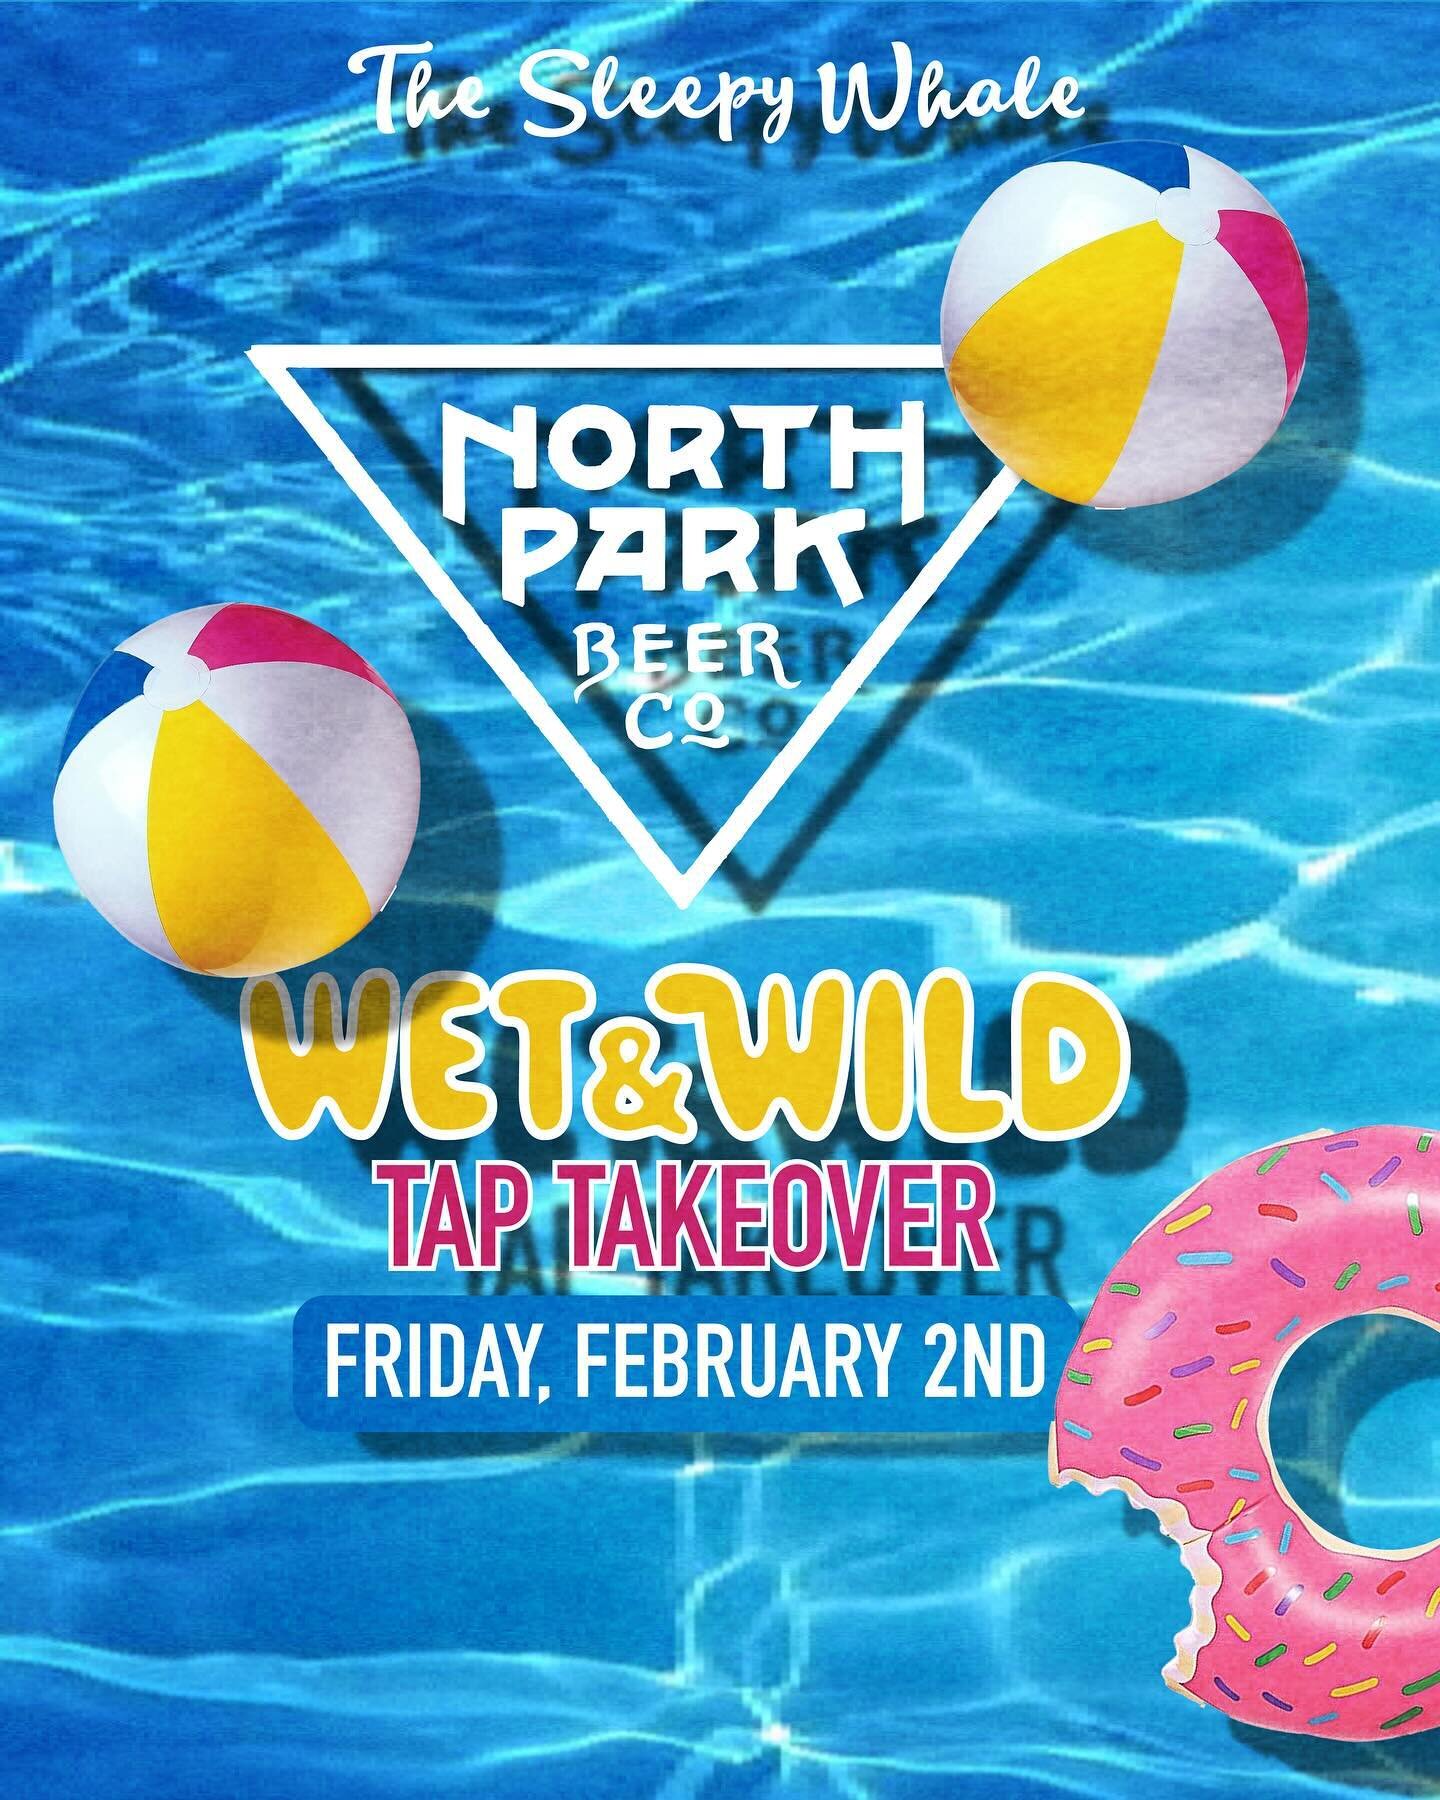 WHO&rsquo;S READY TO SPLASH INTO SOME FUN 🐳

This Friday, we&rsquo;re celebrating the end of dry January with our &lsquo;Wet &amp; Wild&rsquo; @northparkbeerco Tap Takeover! Come enjoy some of their amazing brews straight from the tap. We&rsquo;ll a